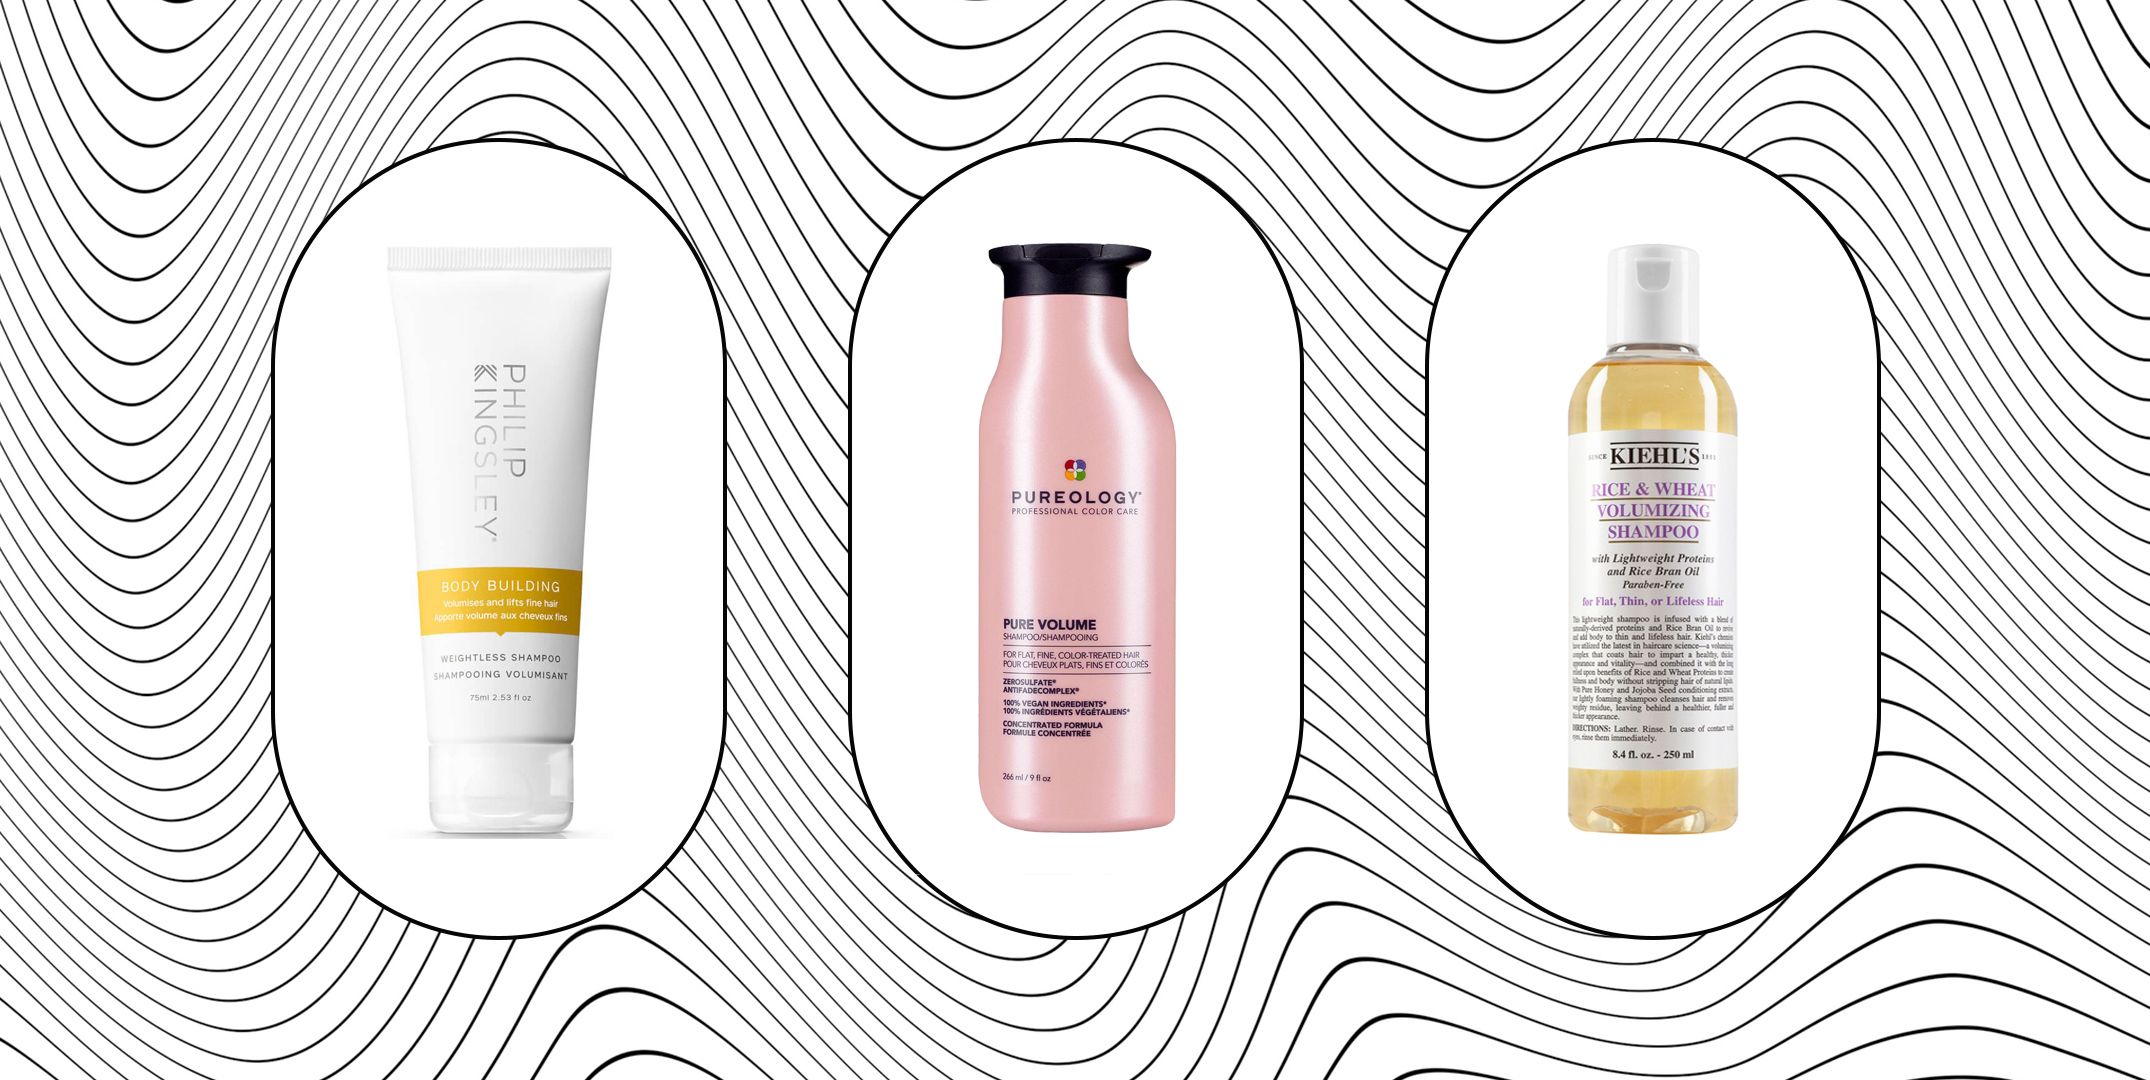 Best Shampoo for Hair 2022: "I reviewed all"